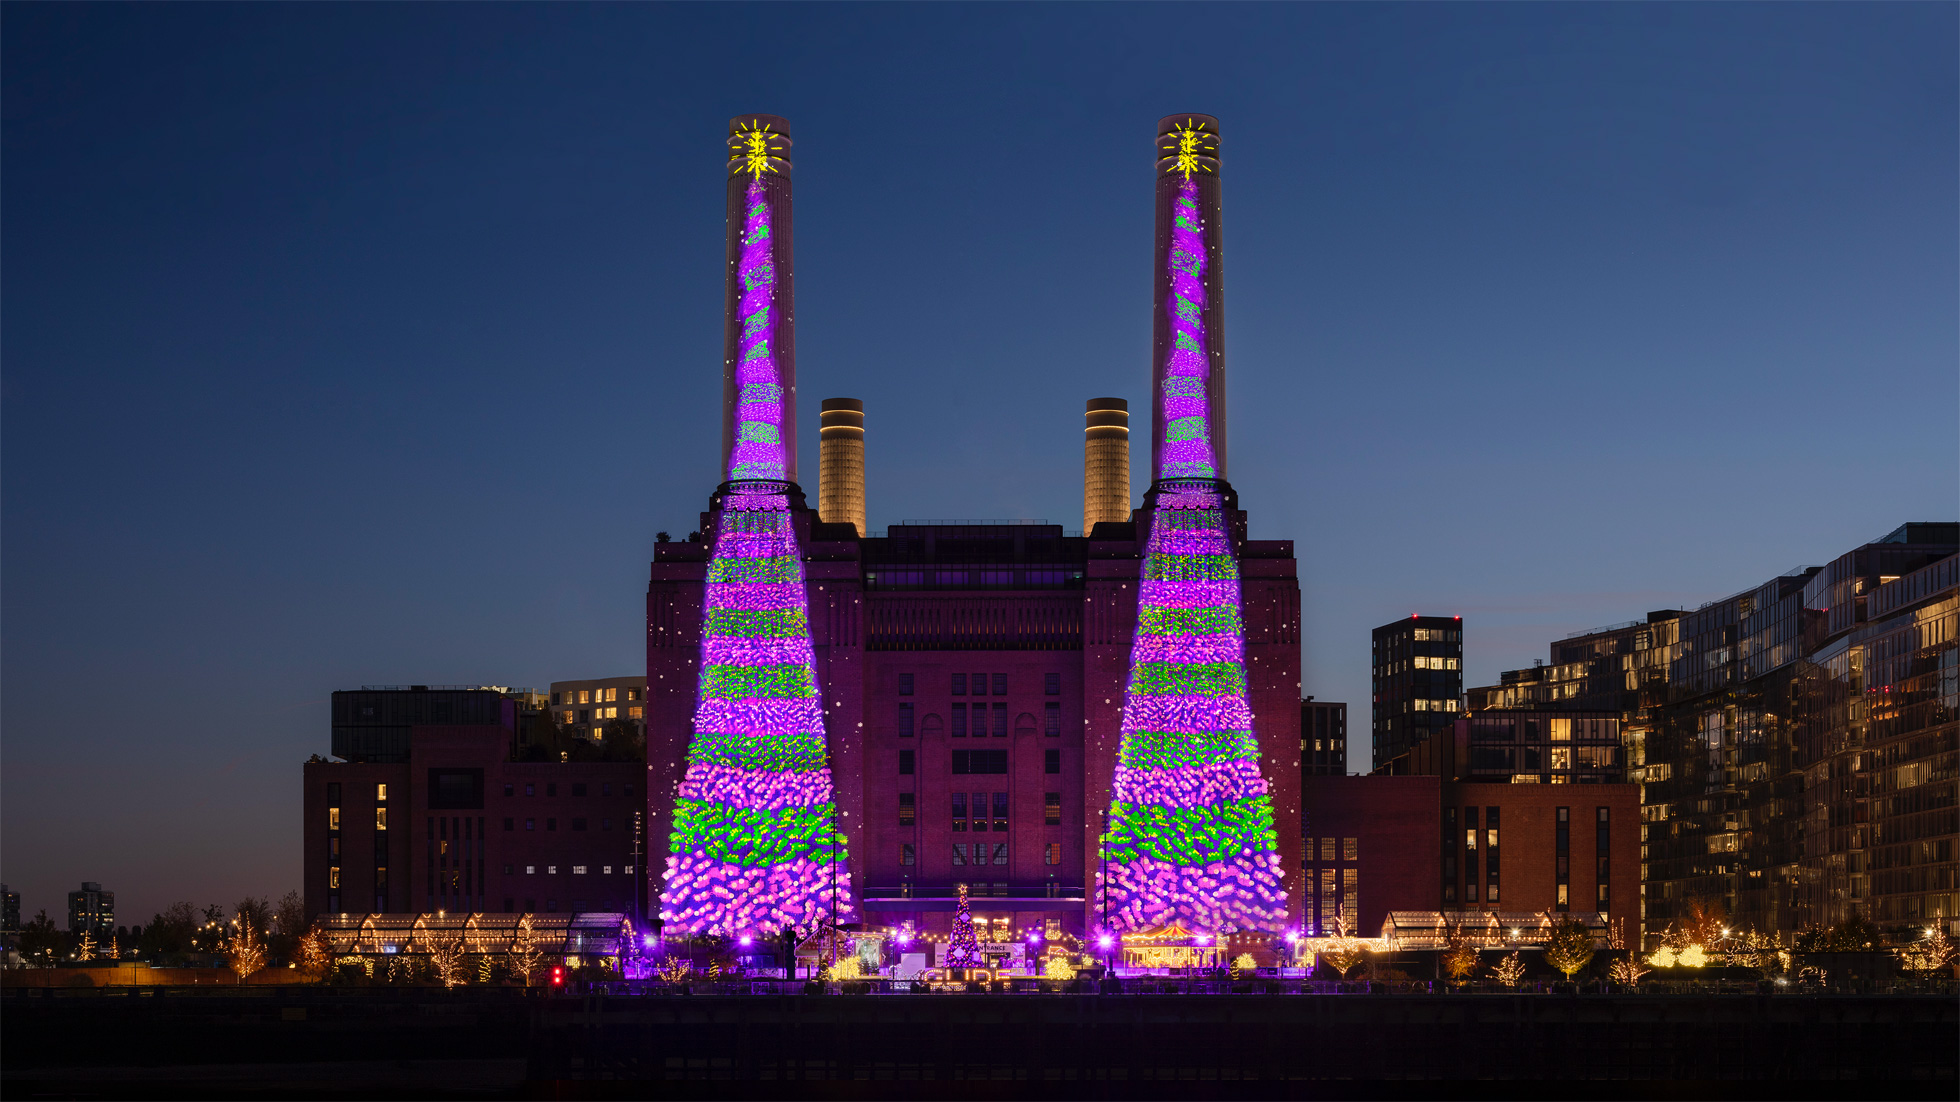 David Hockney's Bigger Christmas Trees, which will light up London’s Battersea Power Station every evening until December 25 | Article on ArtWizard